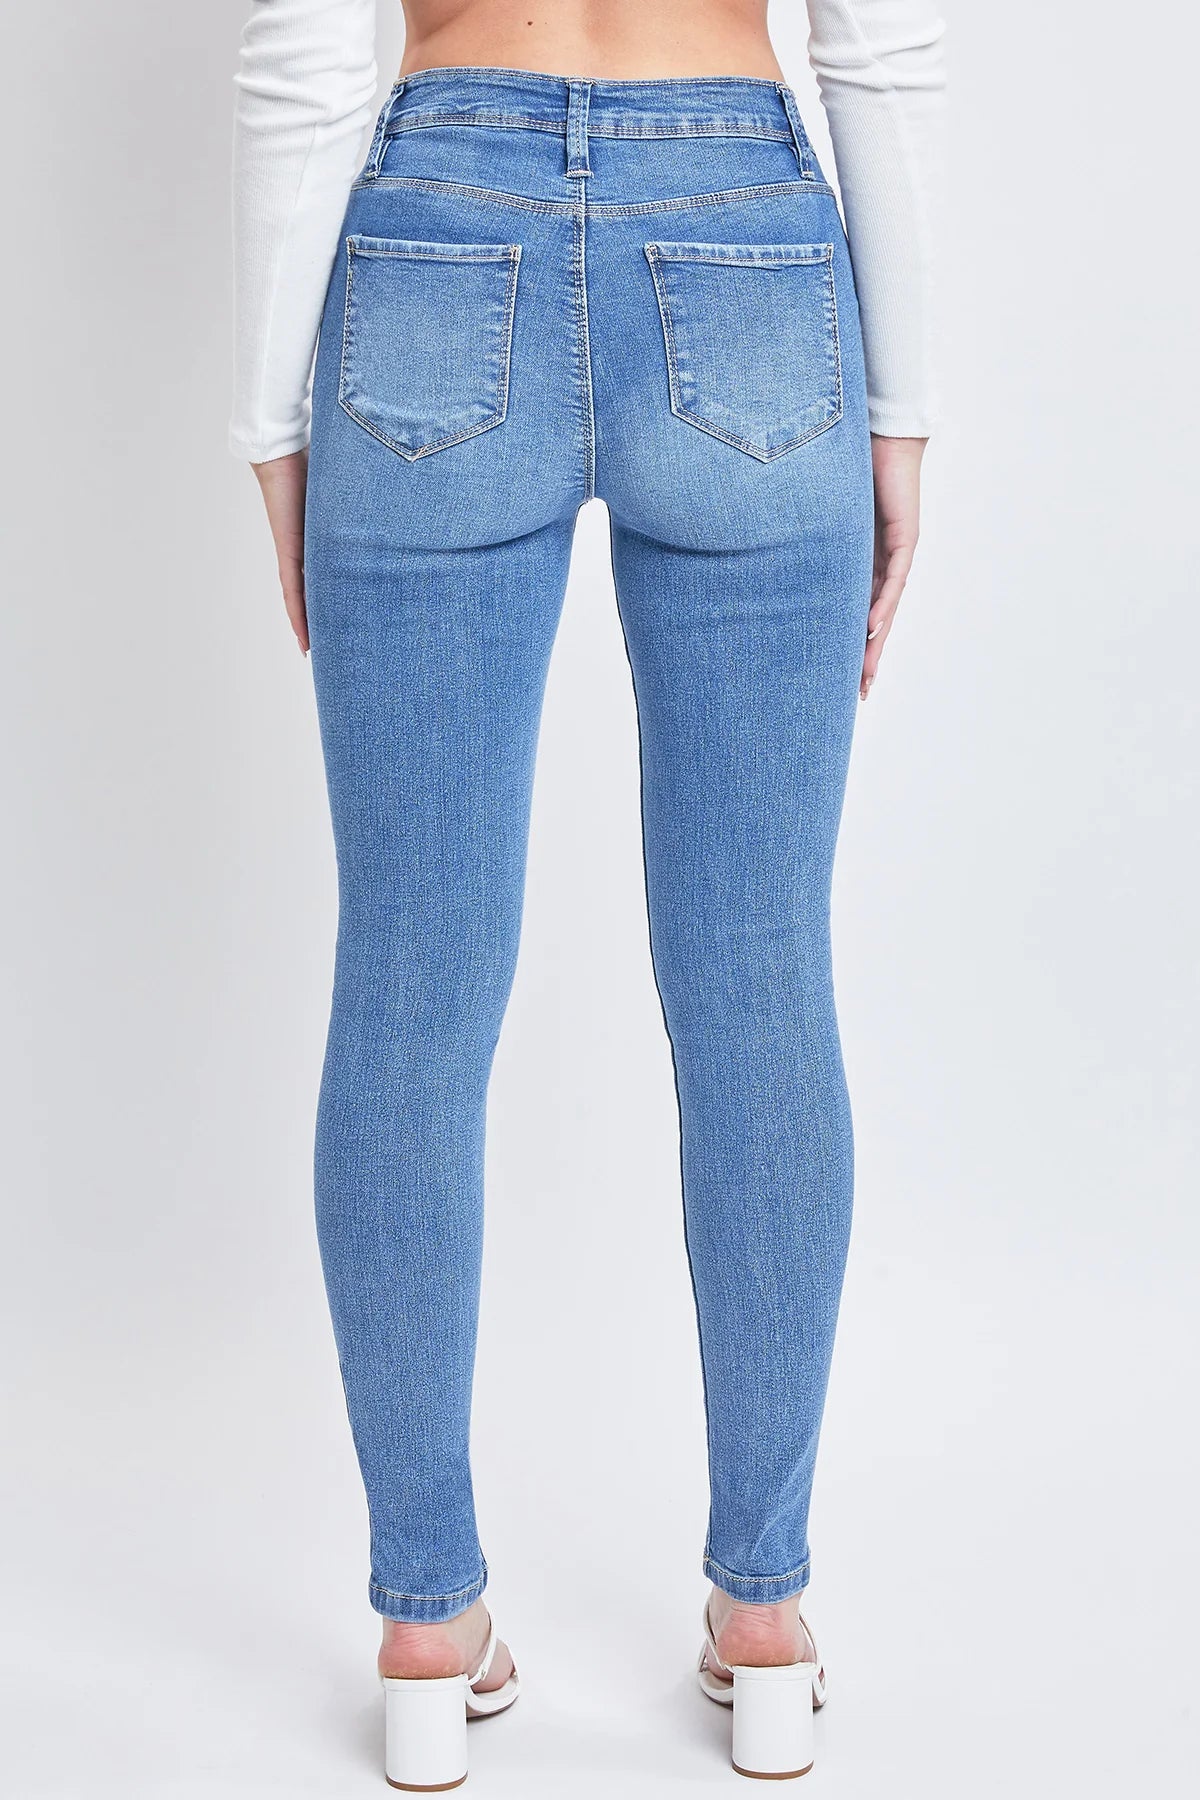 CLASSIC HIGH RISE SKINNY JEANS